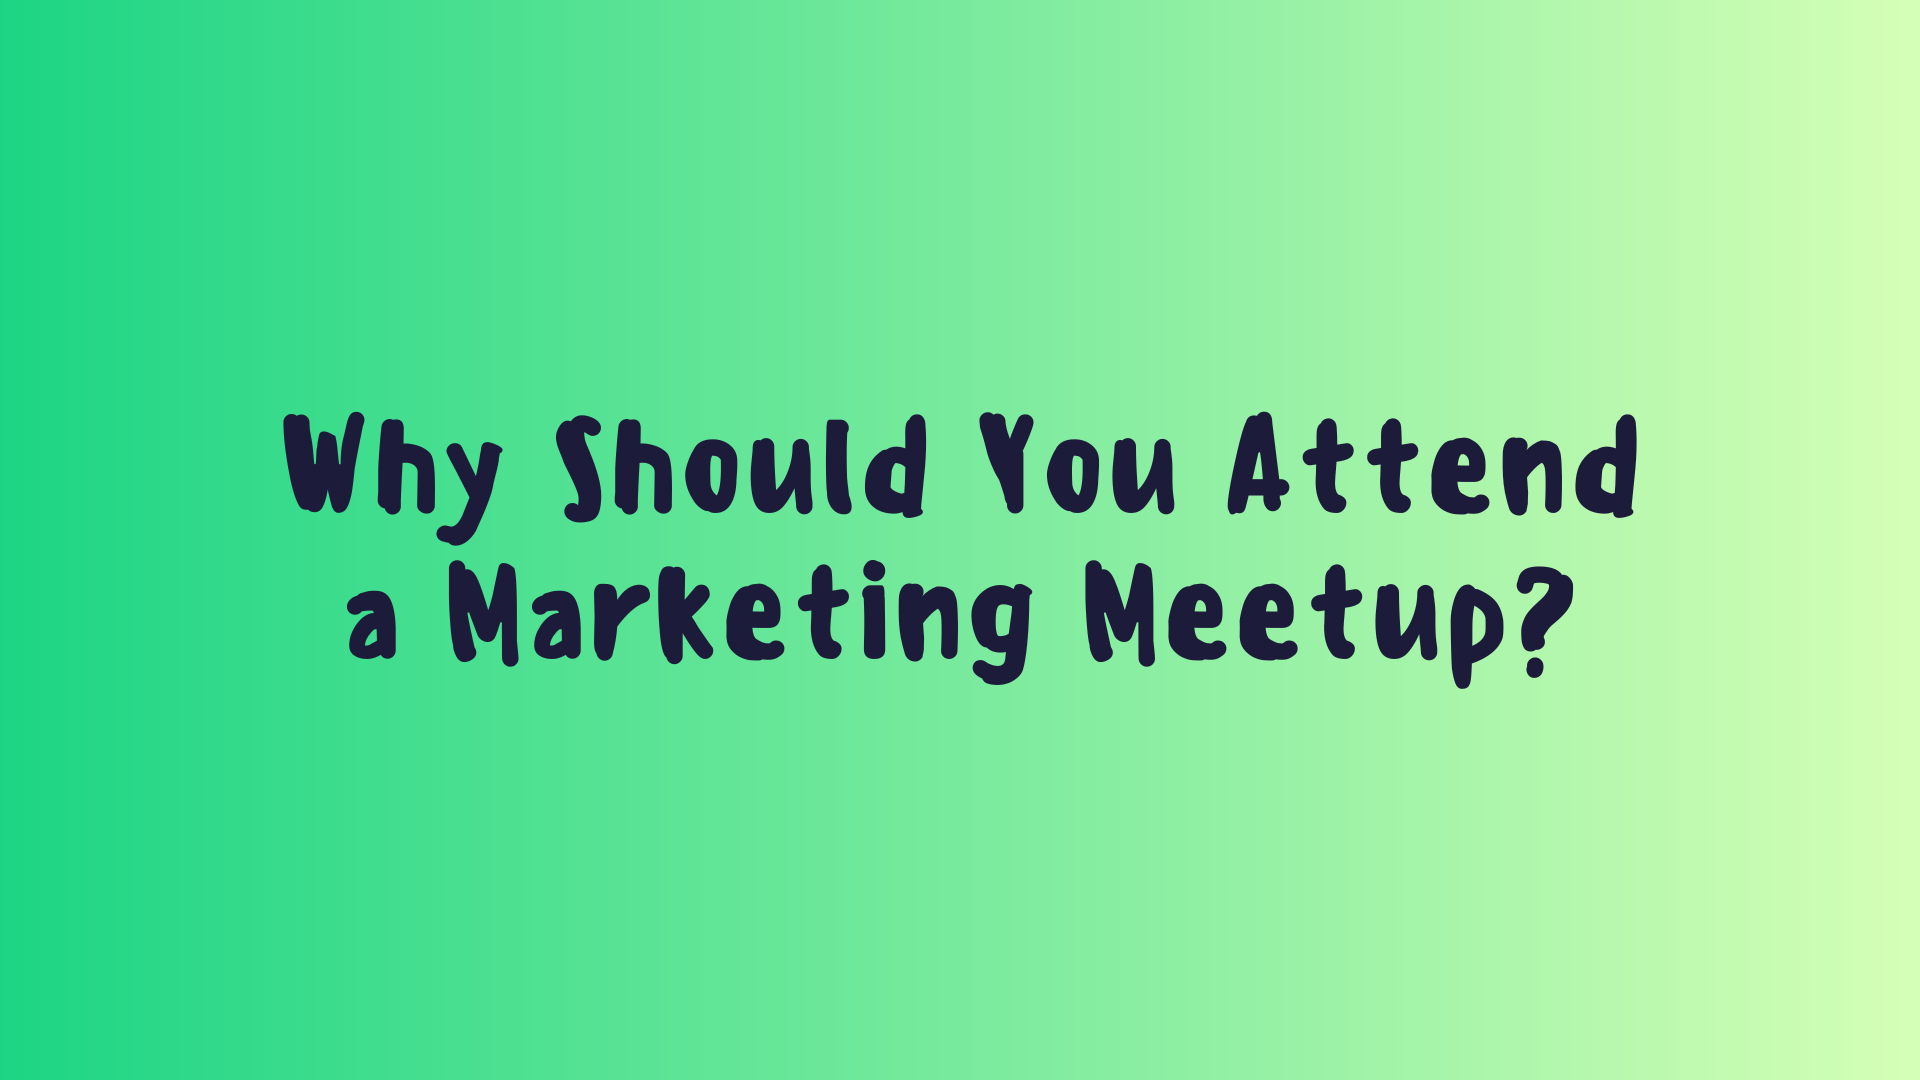 Why Should You Attend a Marketing Meetup?